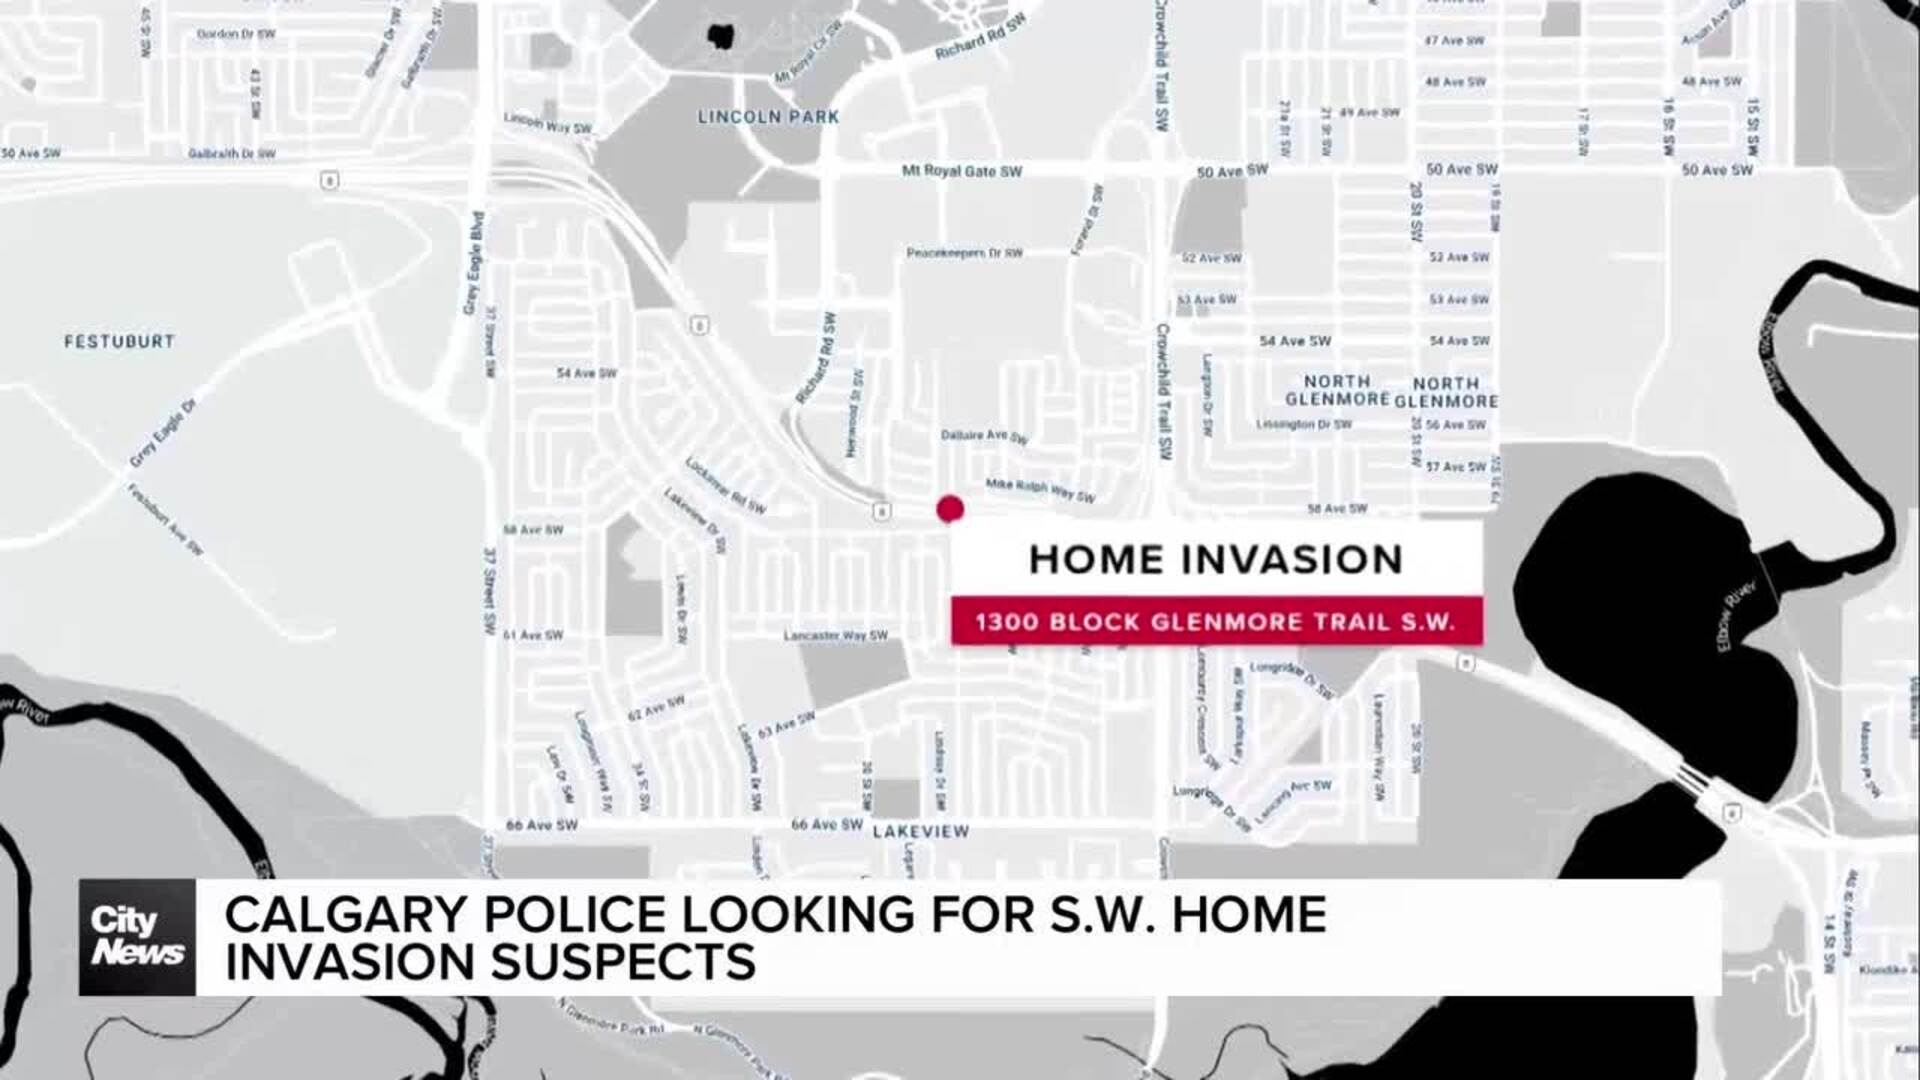 Calgary police look for suspects in S.W. home invasion